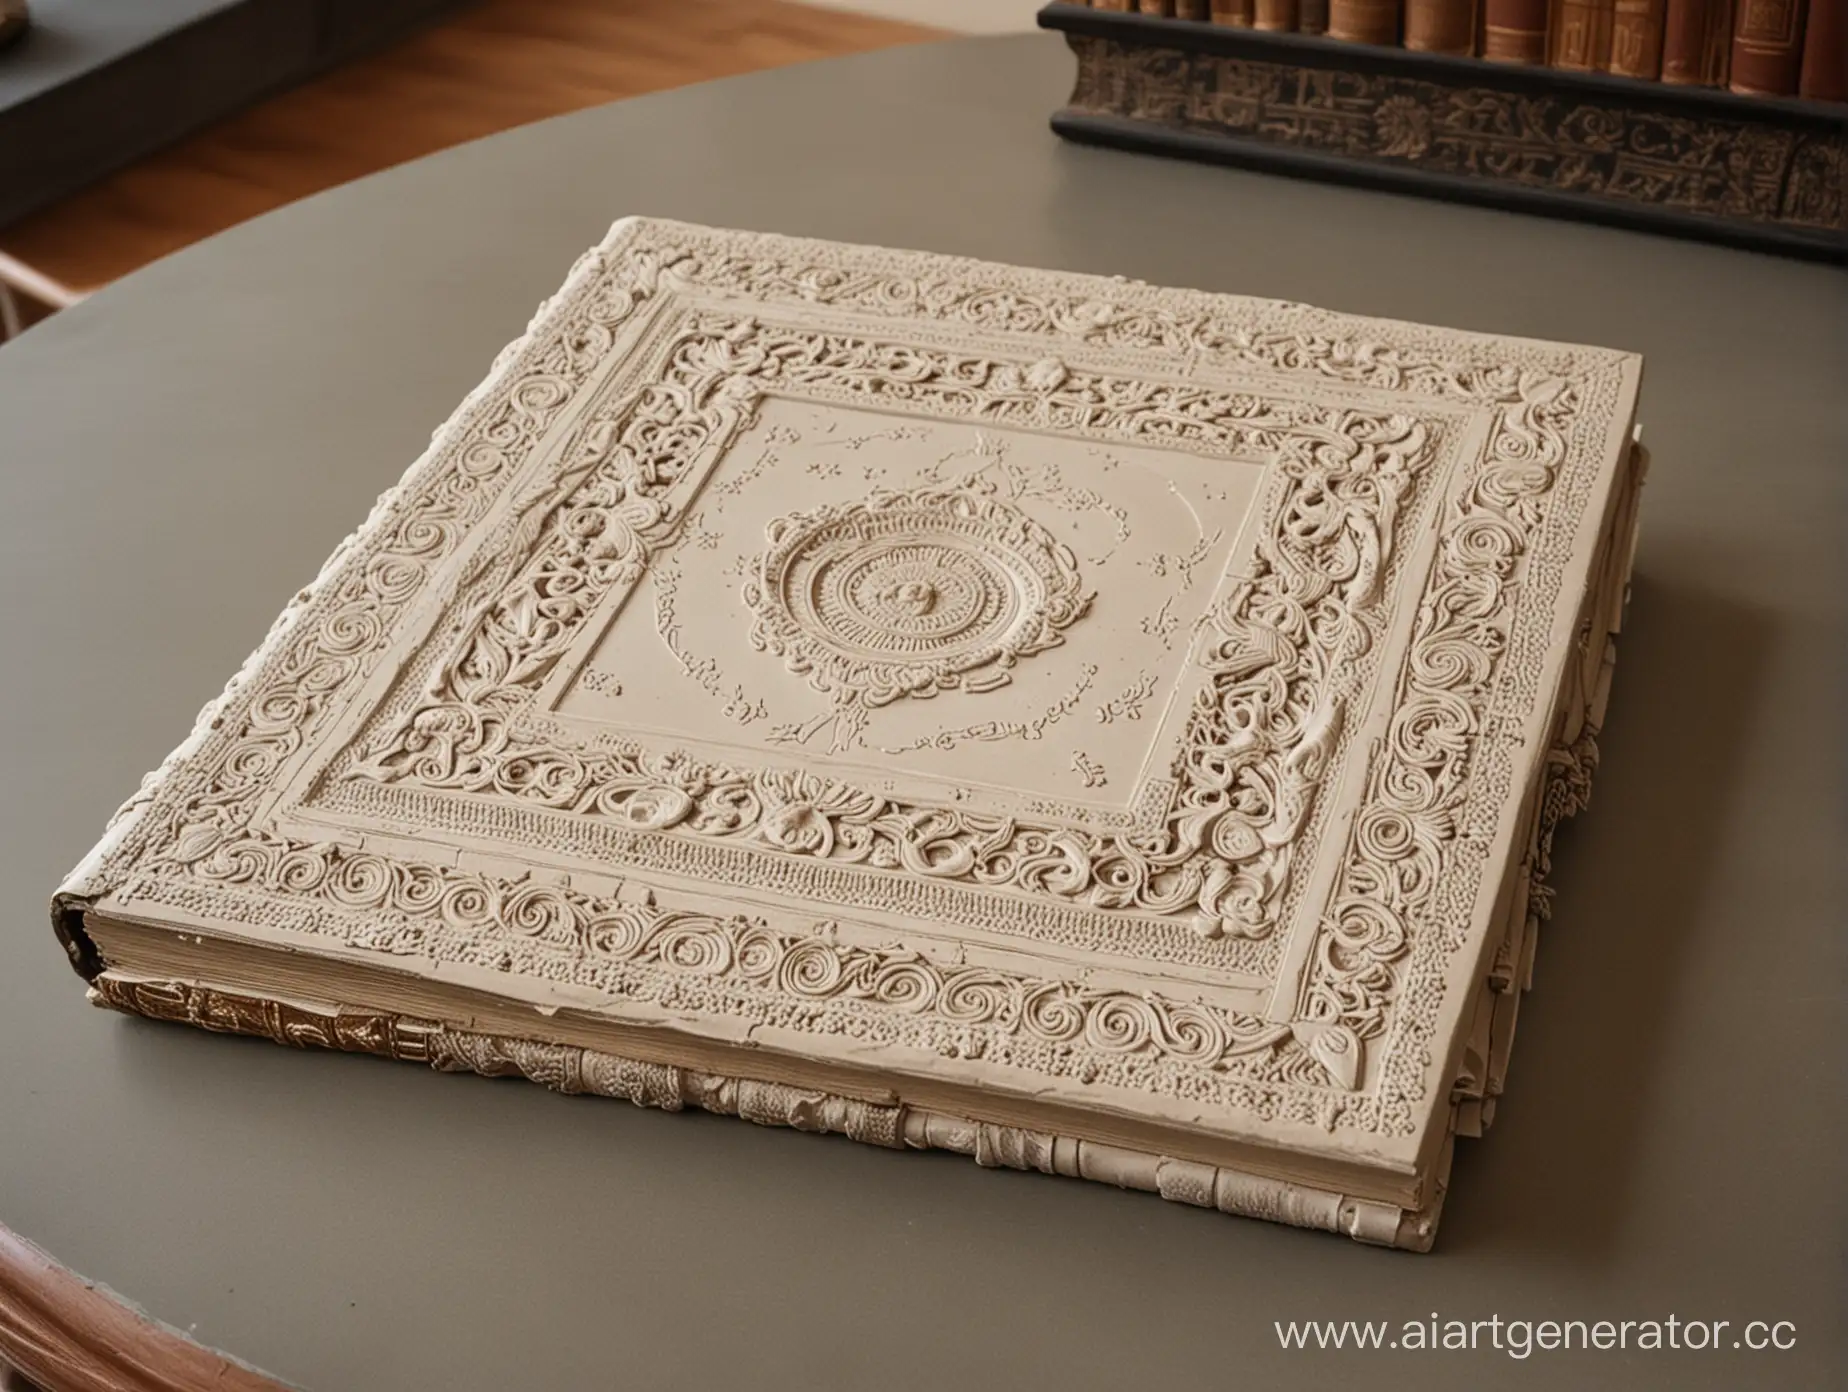 Modern-Library-Table-with-Ornate-Plasterwork-Photo-Album